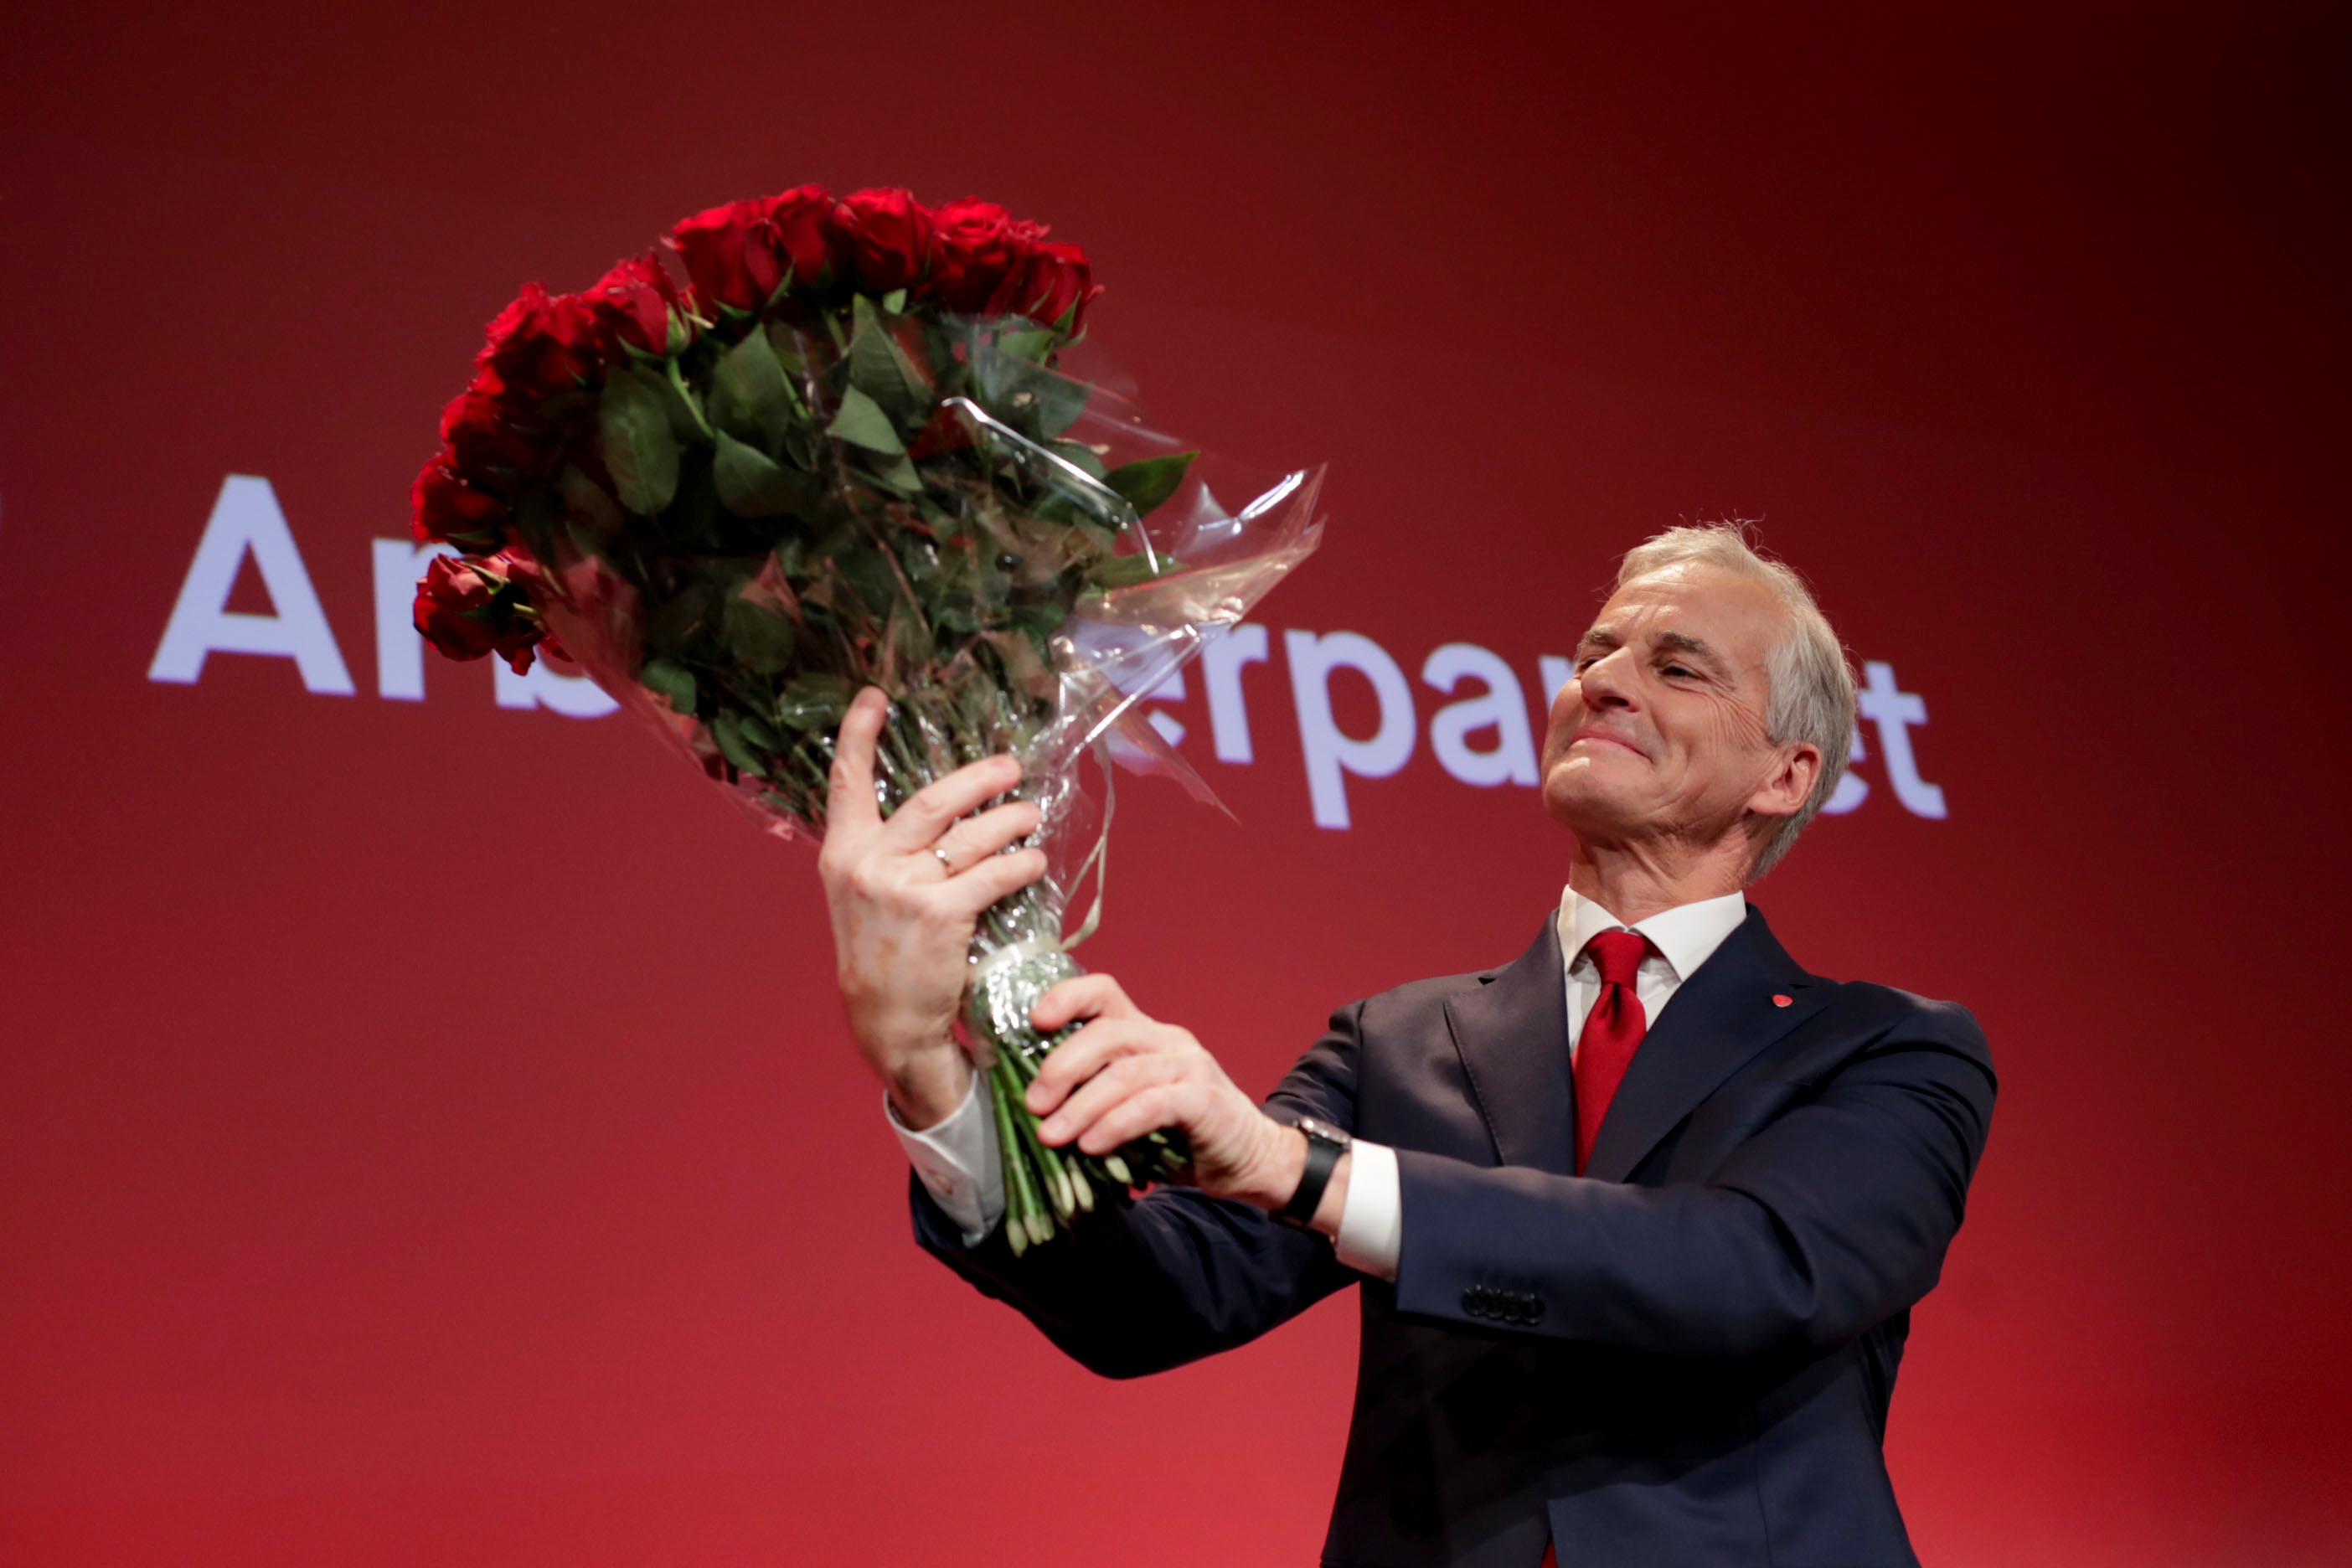 Norway's Labor Party leader Jonas Gahr Stoere holds a bouquet of red roses at the Labor Party's election vigil at the People's House during parliamentary elections in Oslo, Norway September 13, 2021. Javad Parsa/NTB via REUTERS   